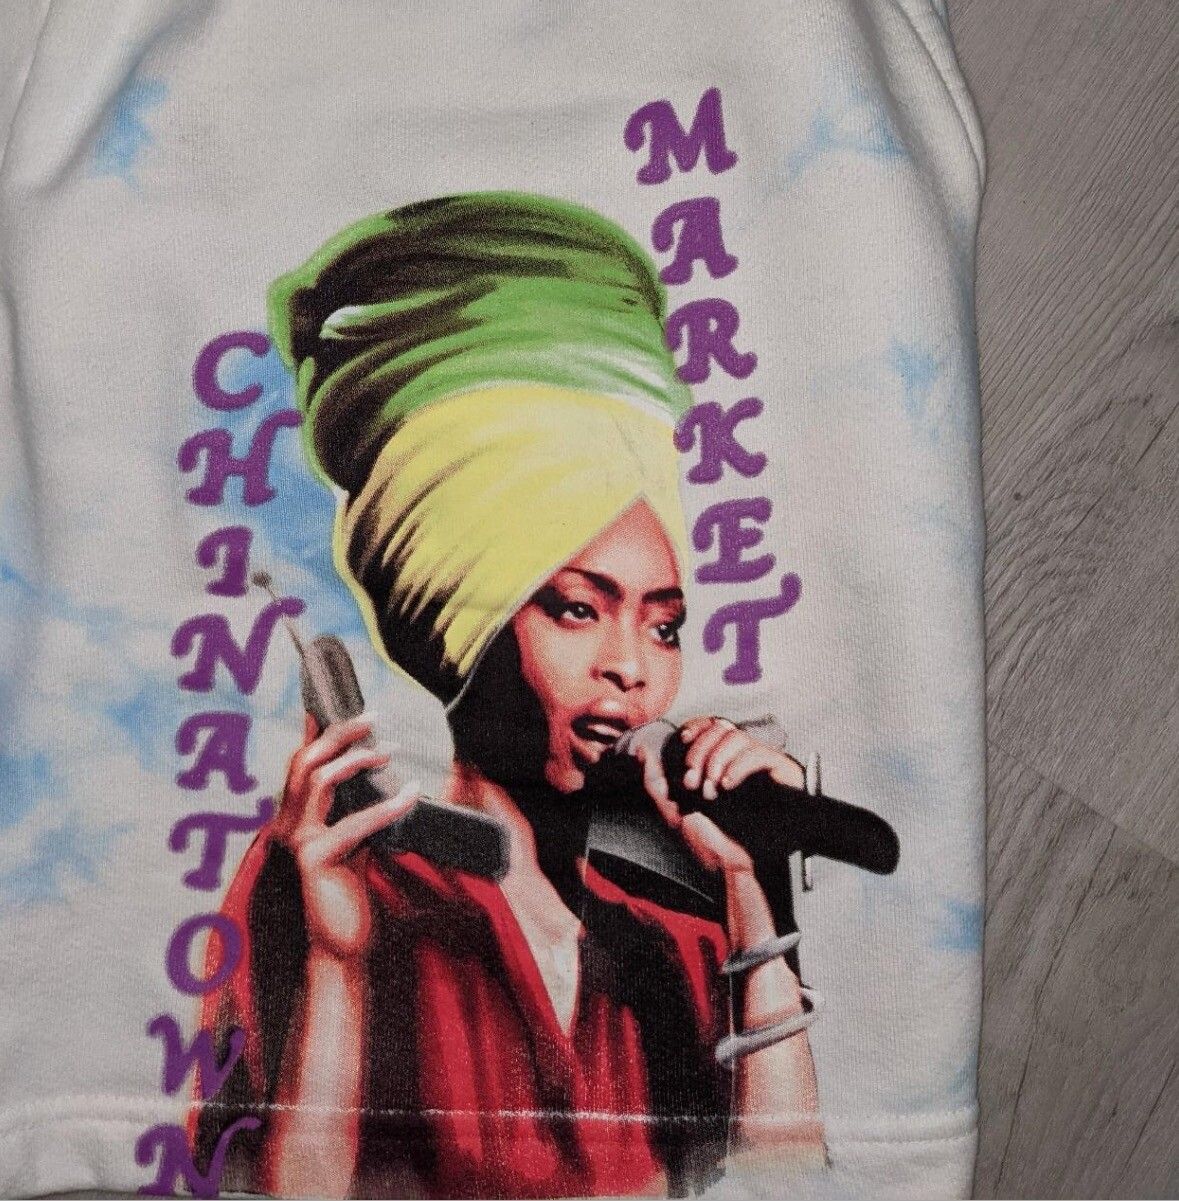 Market Erykah Badu/Call Tyrone x CTM Collection Size US 36 / EU 52 - 2 Preview